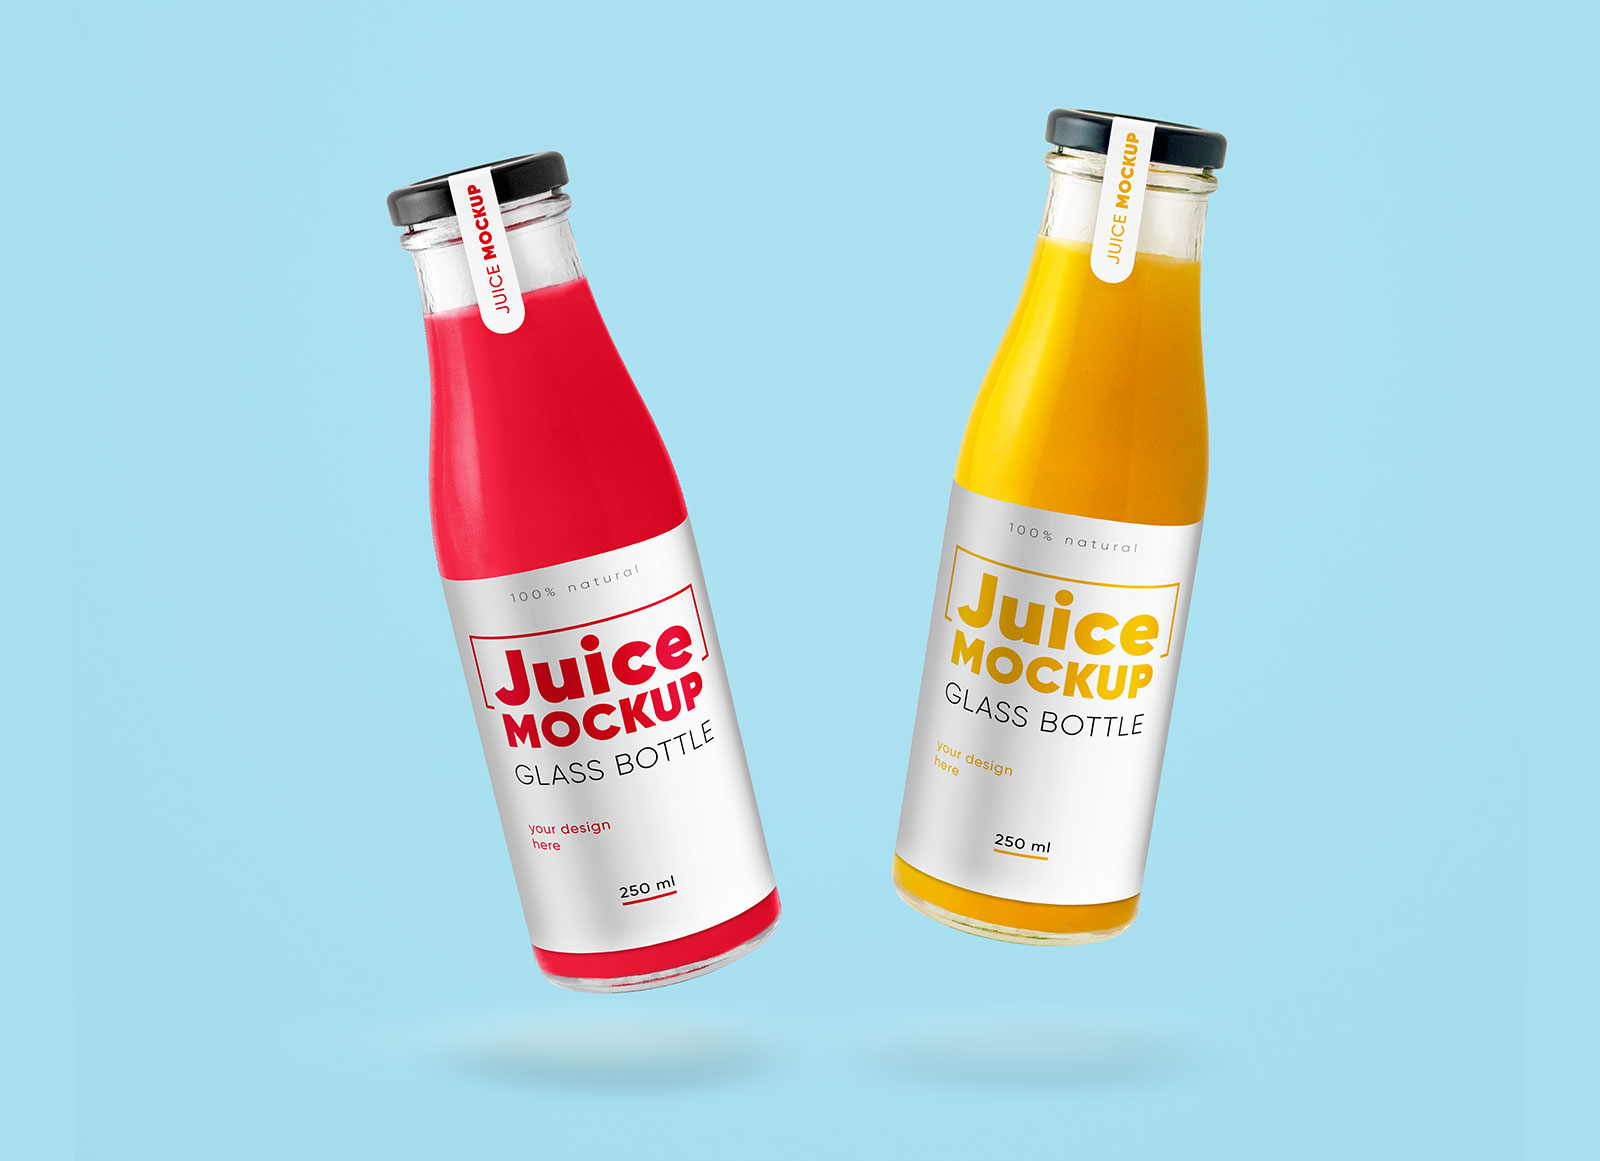 Download 50+ Awesome Juice Packaging PSD Mockup Templates | Decolore.Net